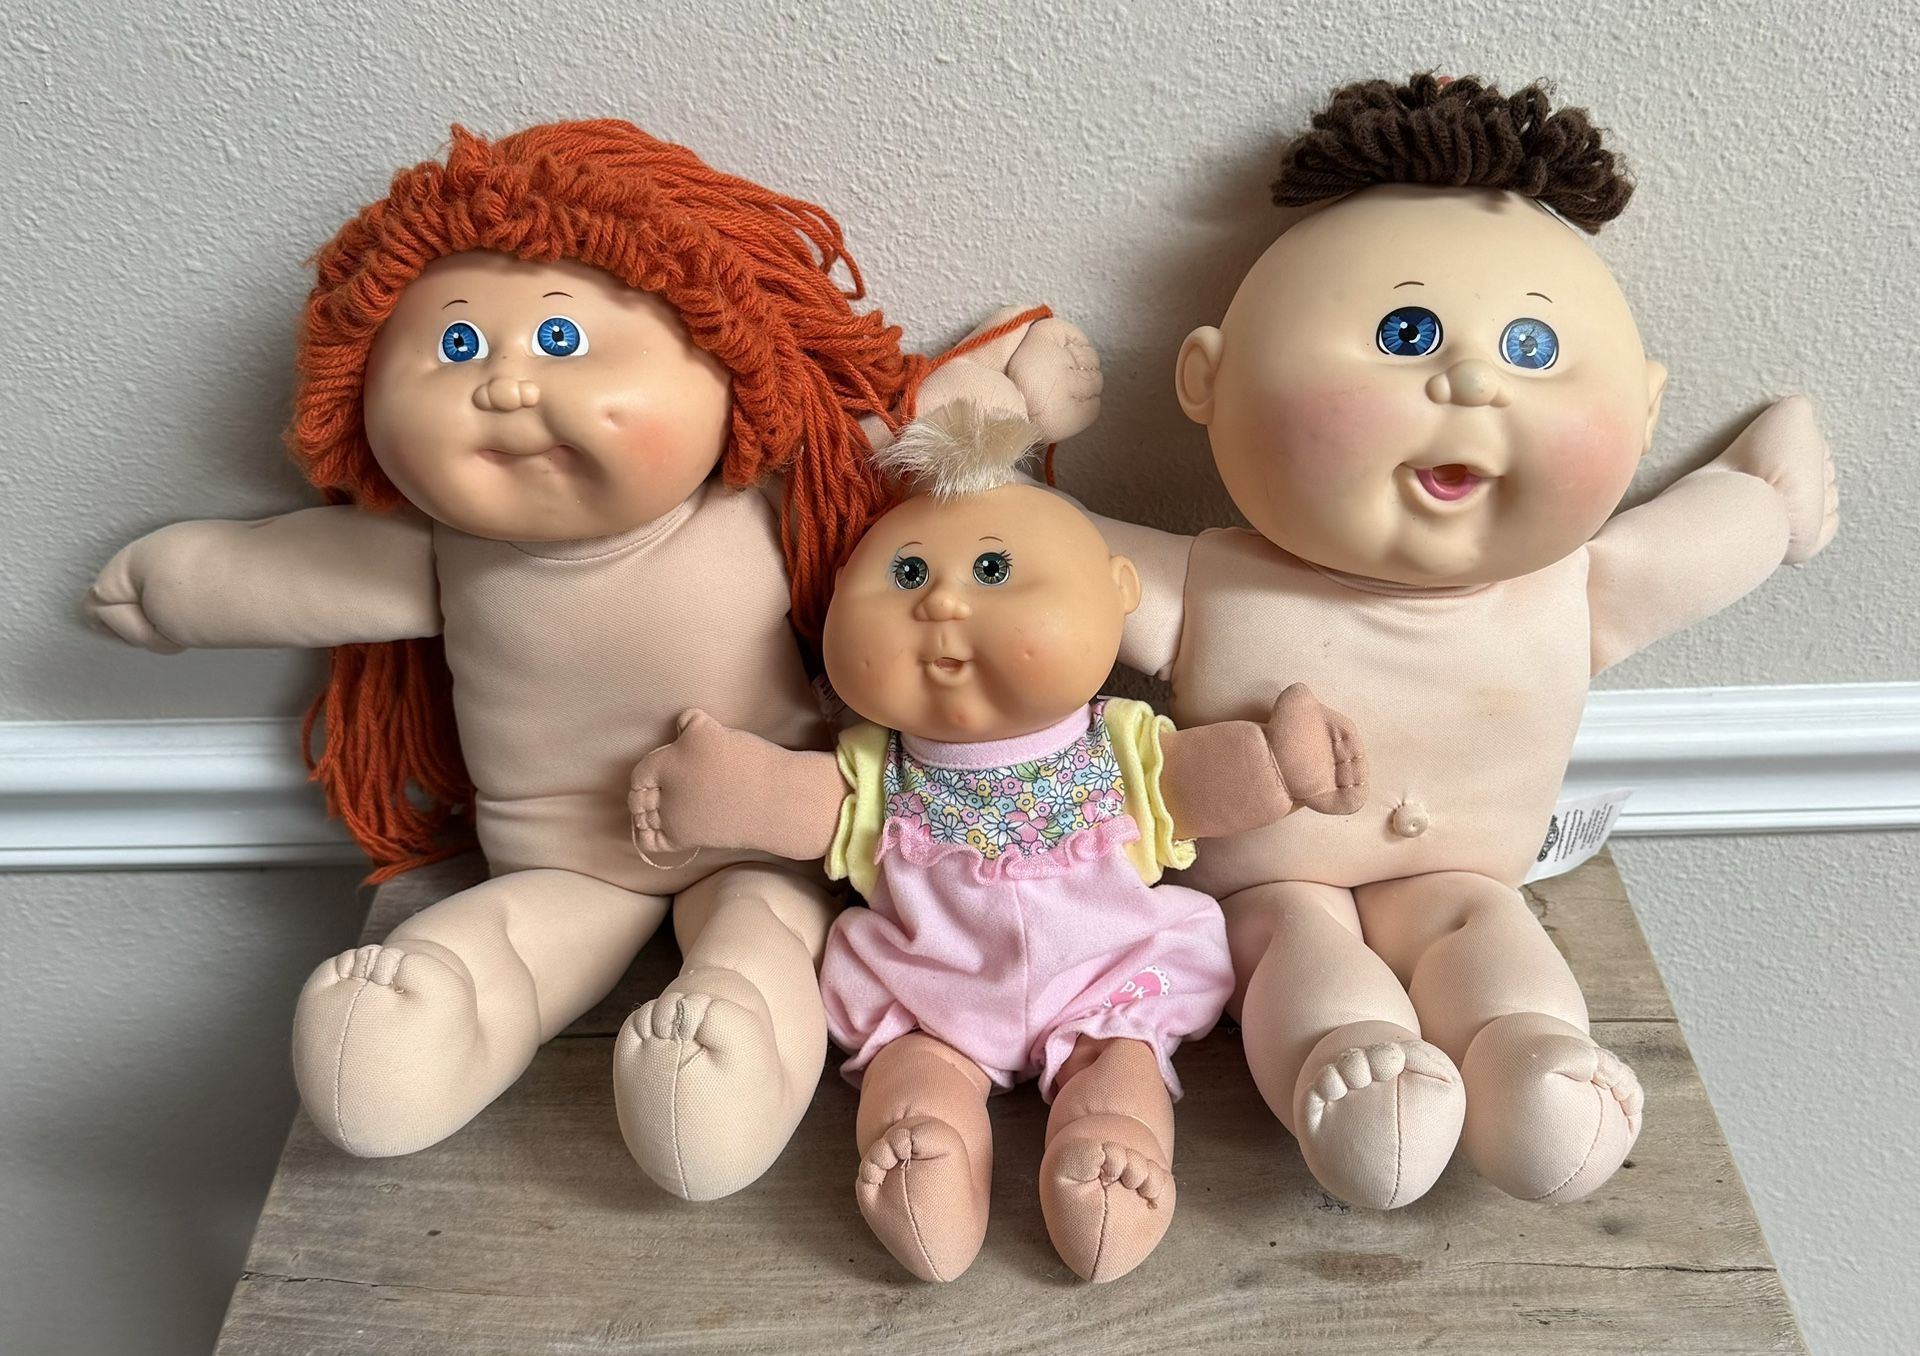 Cabbage Patch Kid CPK Dolls $10 for All xox